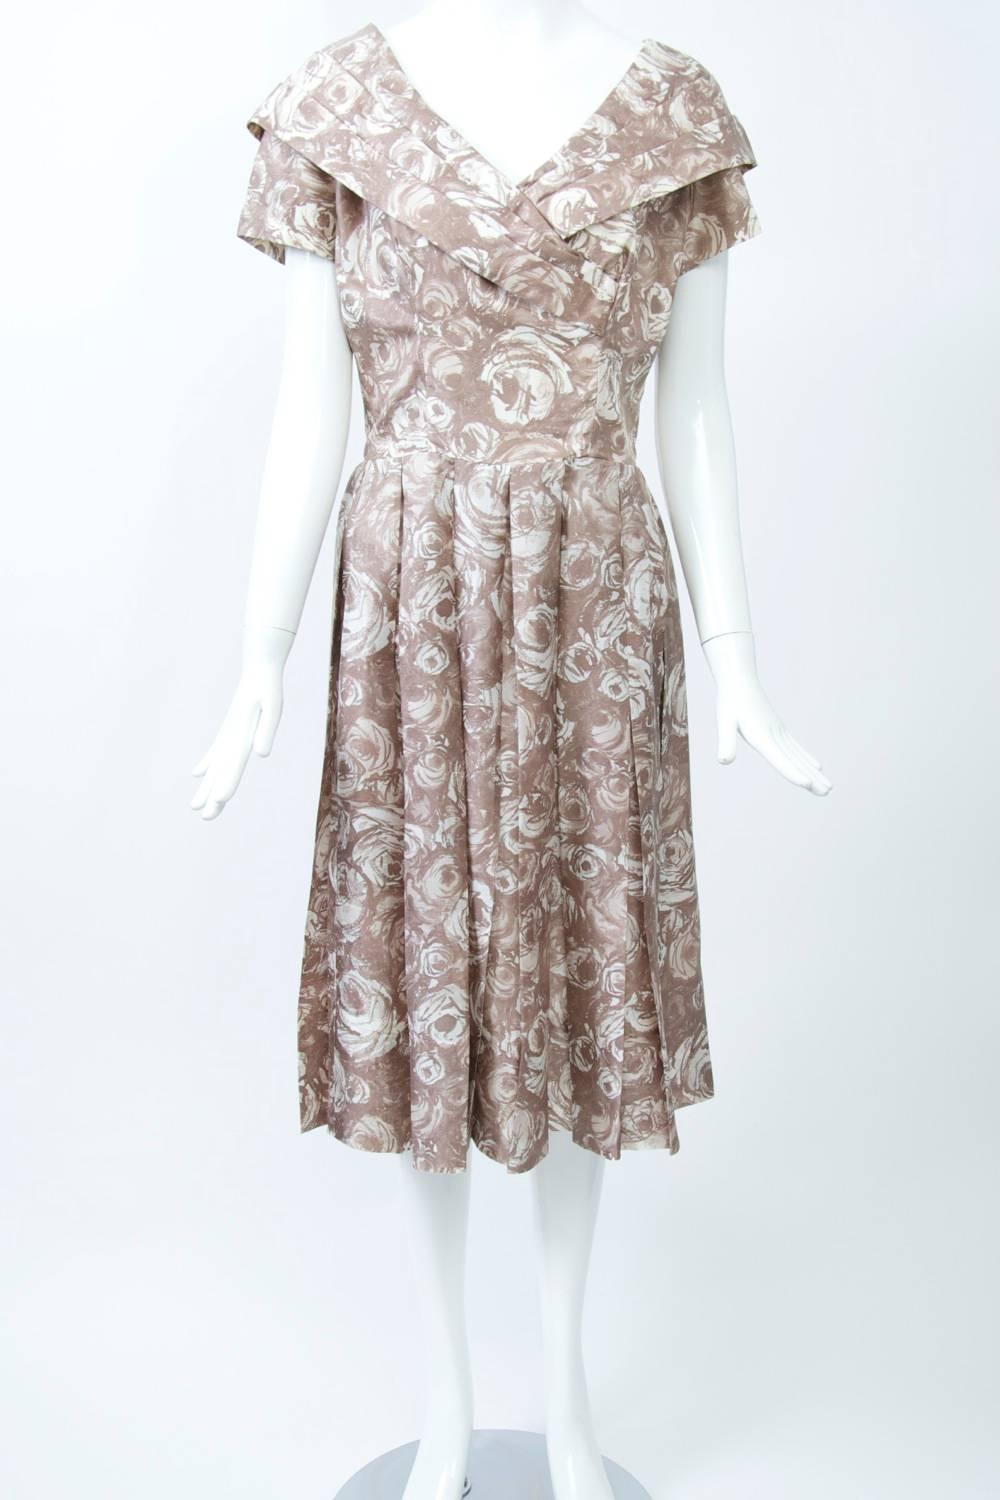 Suzy Perette 1950s-'60s silk dress composed of a tan and white abstract floral print. The dress features a surplice V-neckline with wide and pleated shawl collar, short sleeves, and fitted bodice; below the seamed waistline is a soft skirt with wide